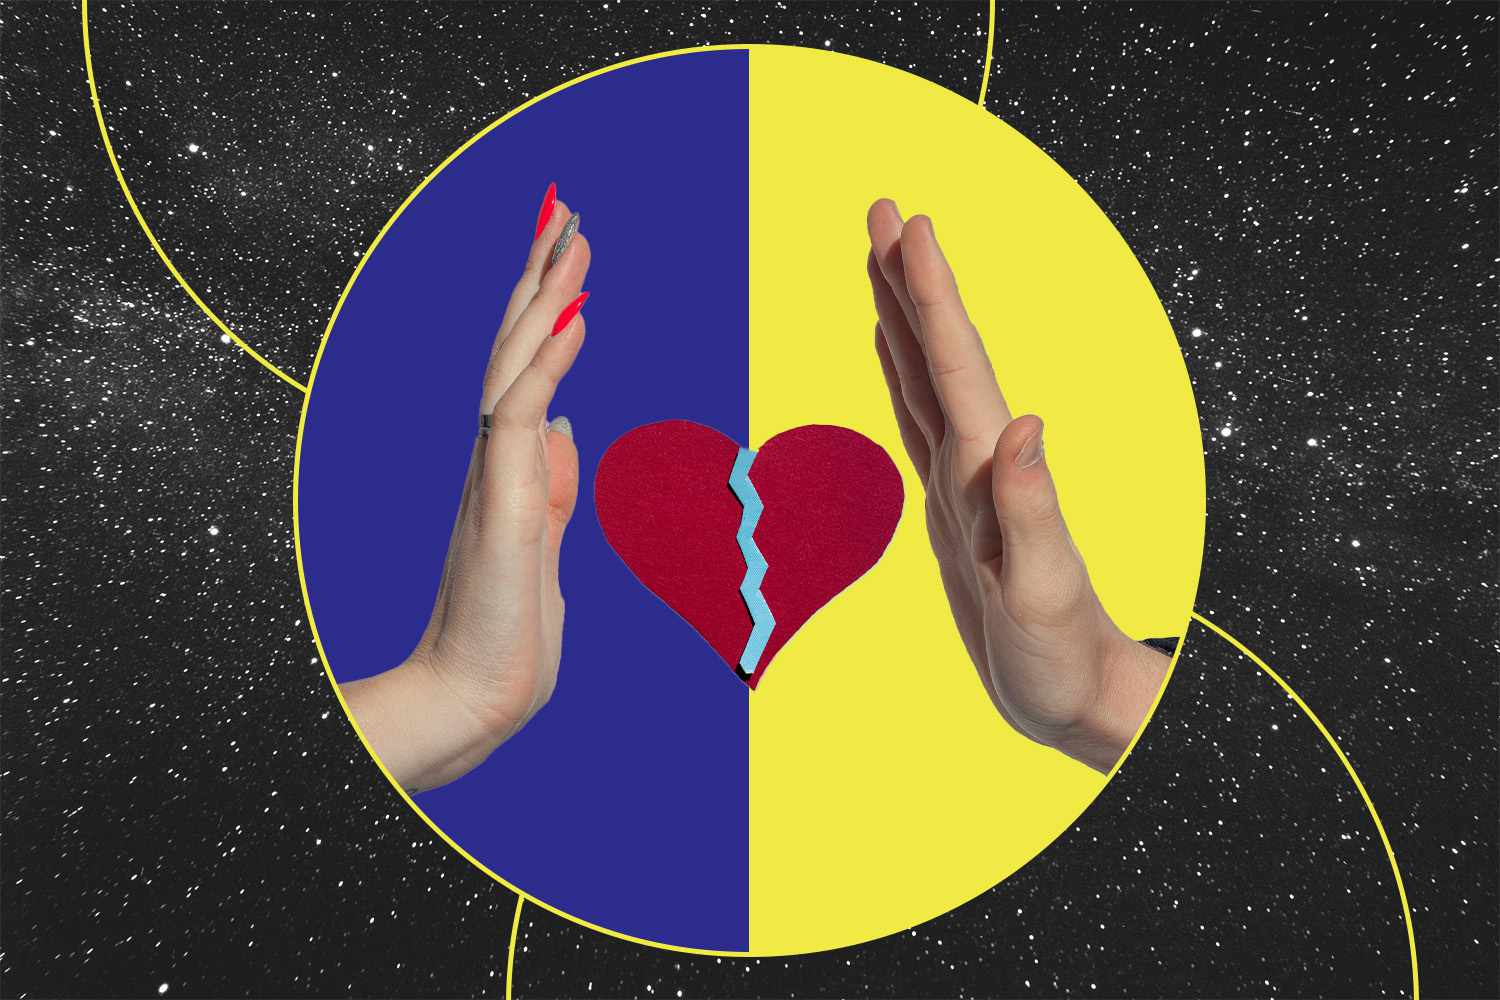 Here's Your Worst Love Match, Based on Your Sign